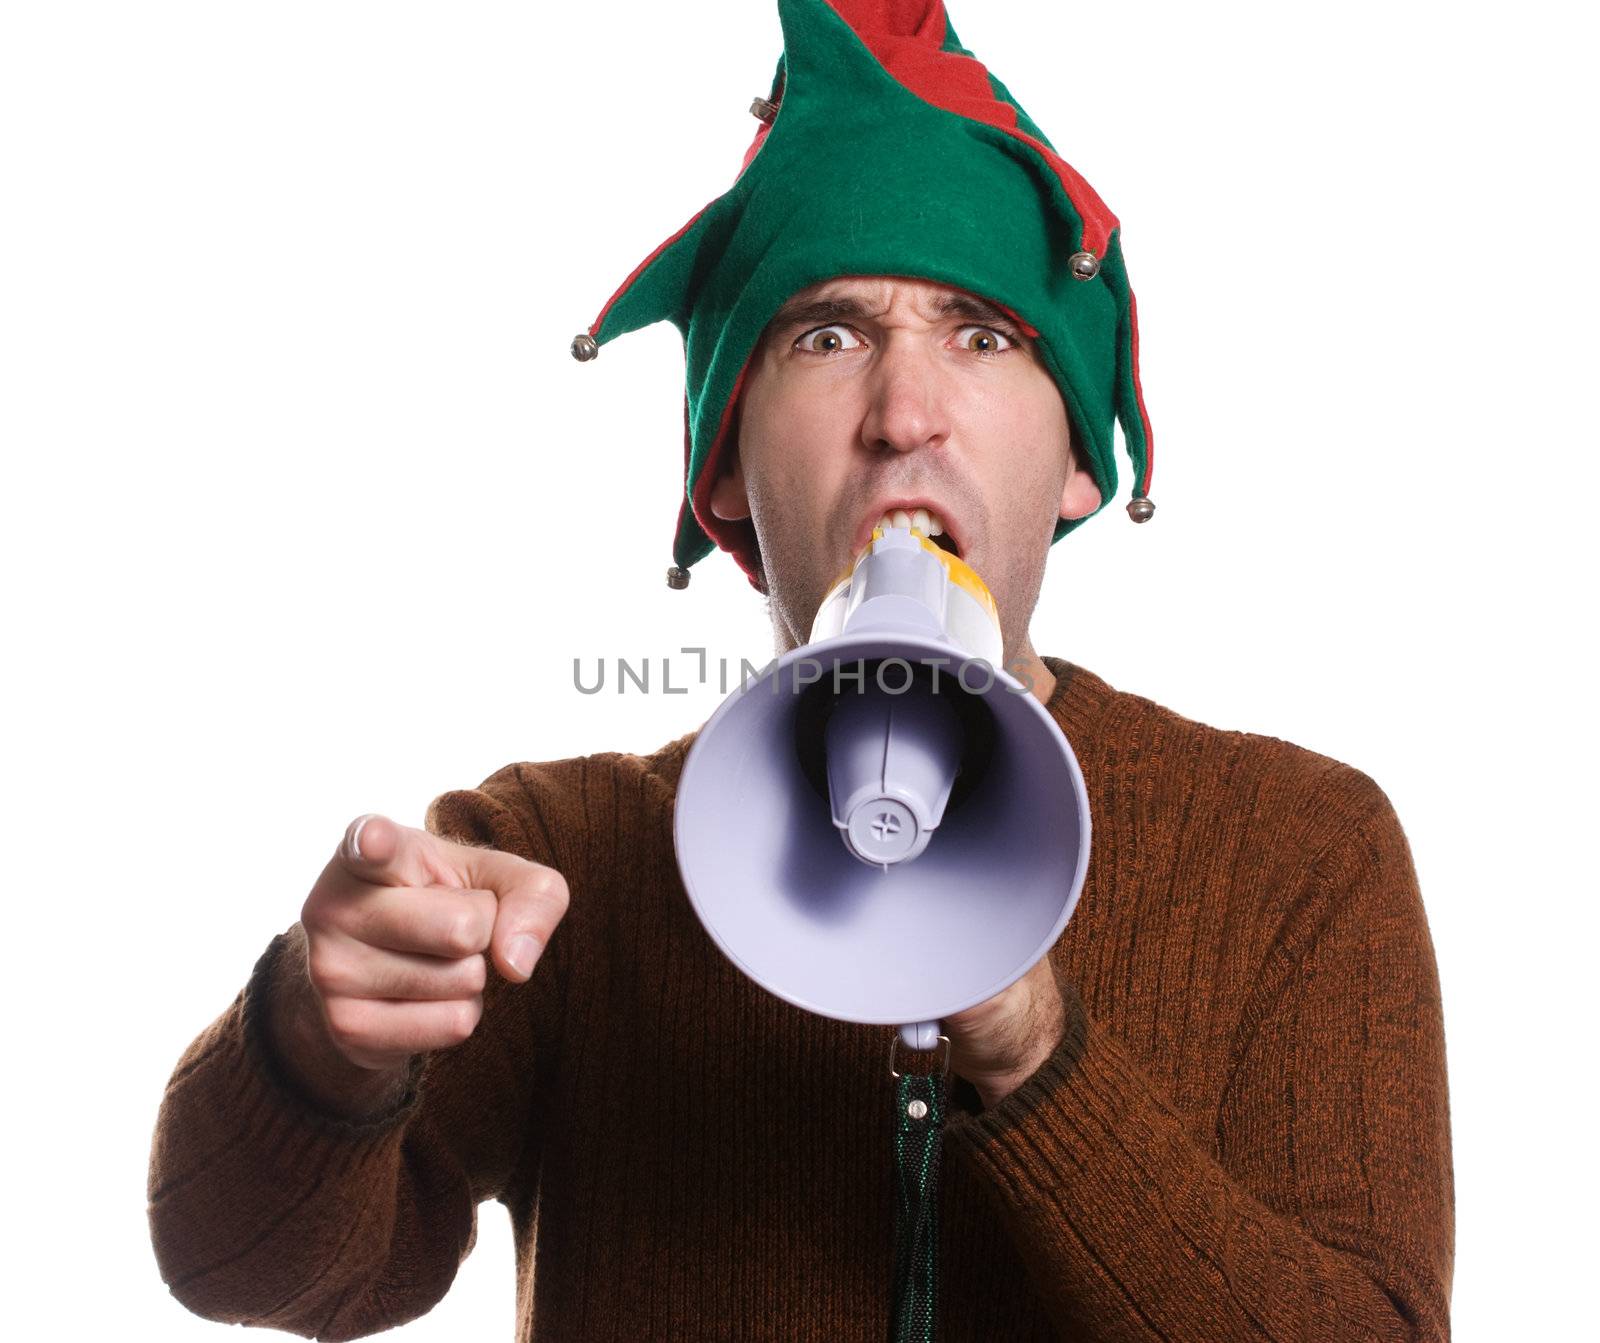 An adult elf is hollering into a megaphone and pointing with his finger